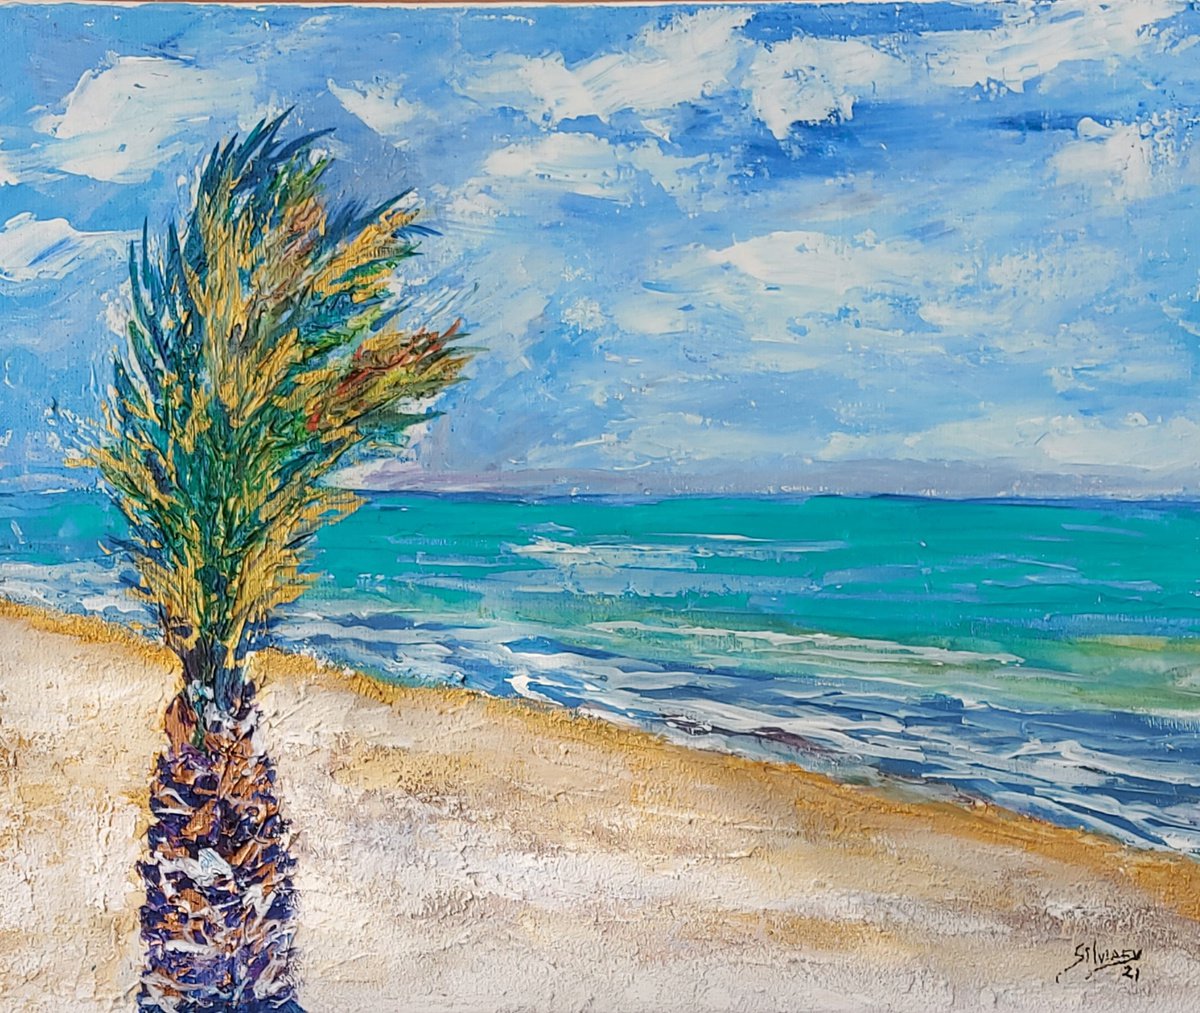 Sea breeze and palm tree by Silvia Flores Vitiello